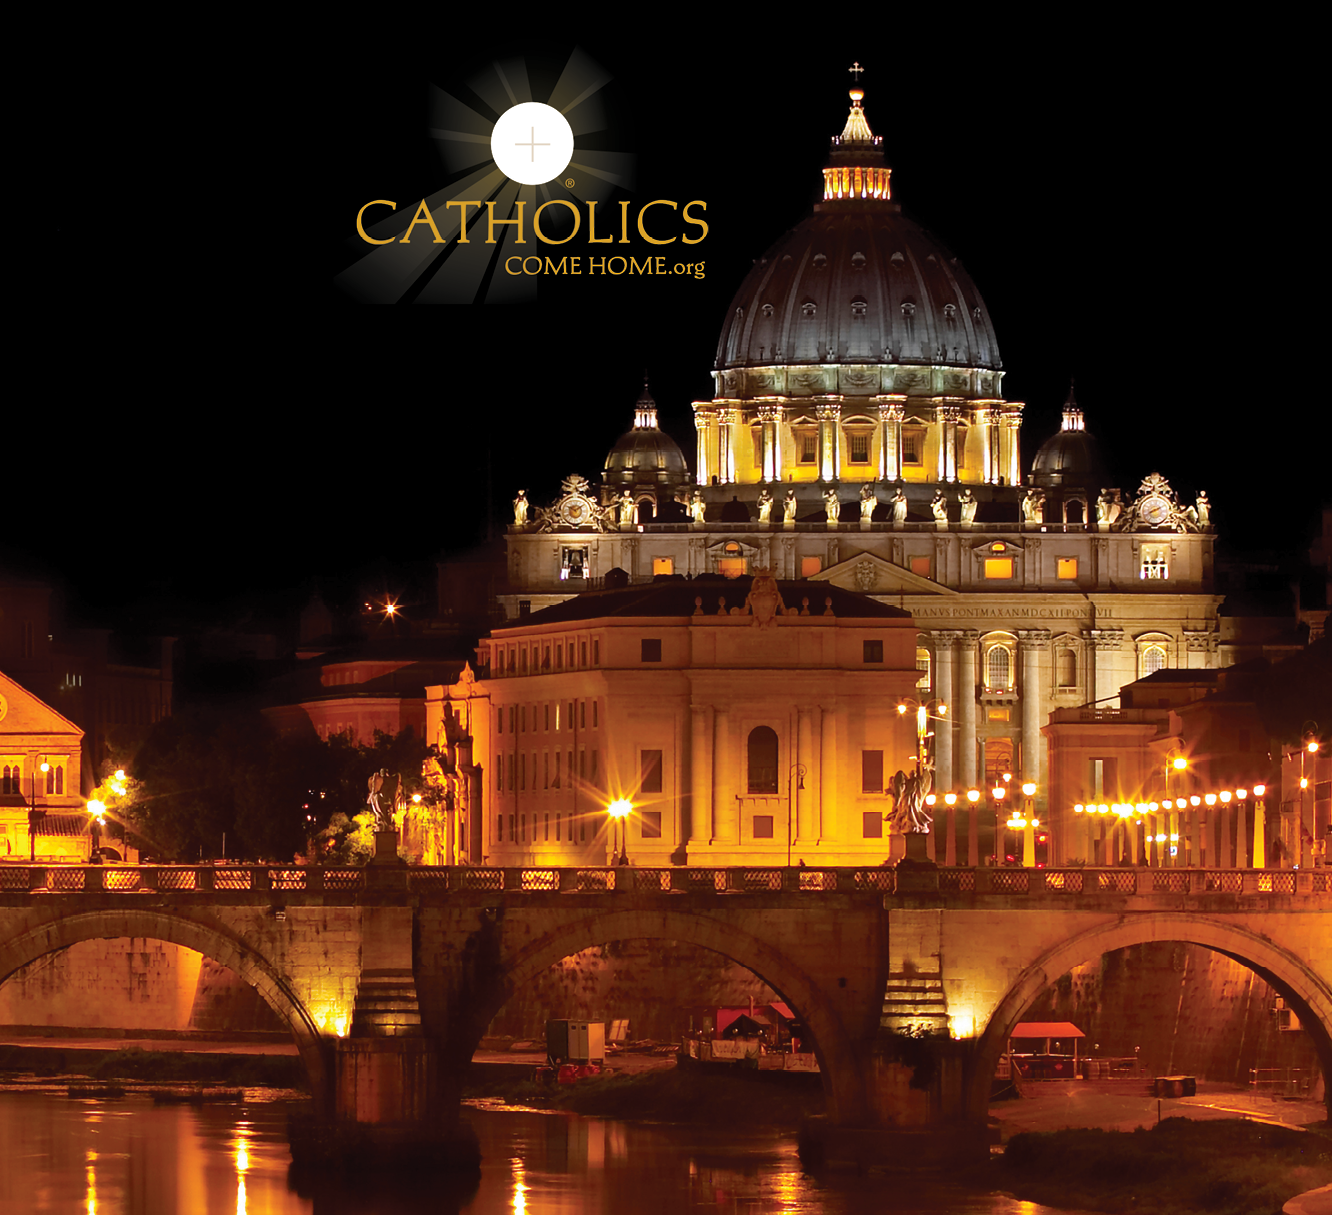 Catholics Come Home logo and St. Peter's Basilica at night